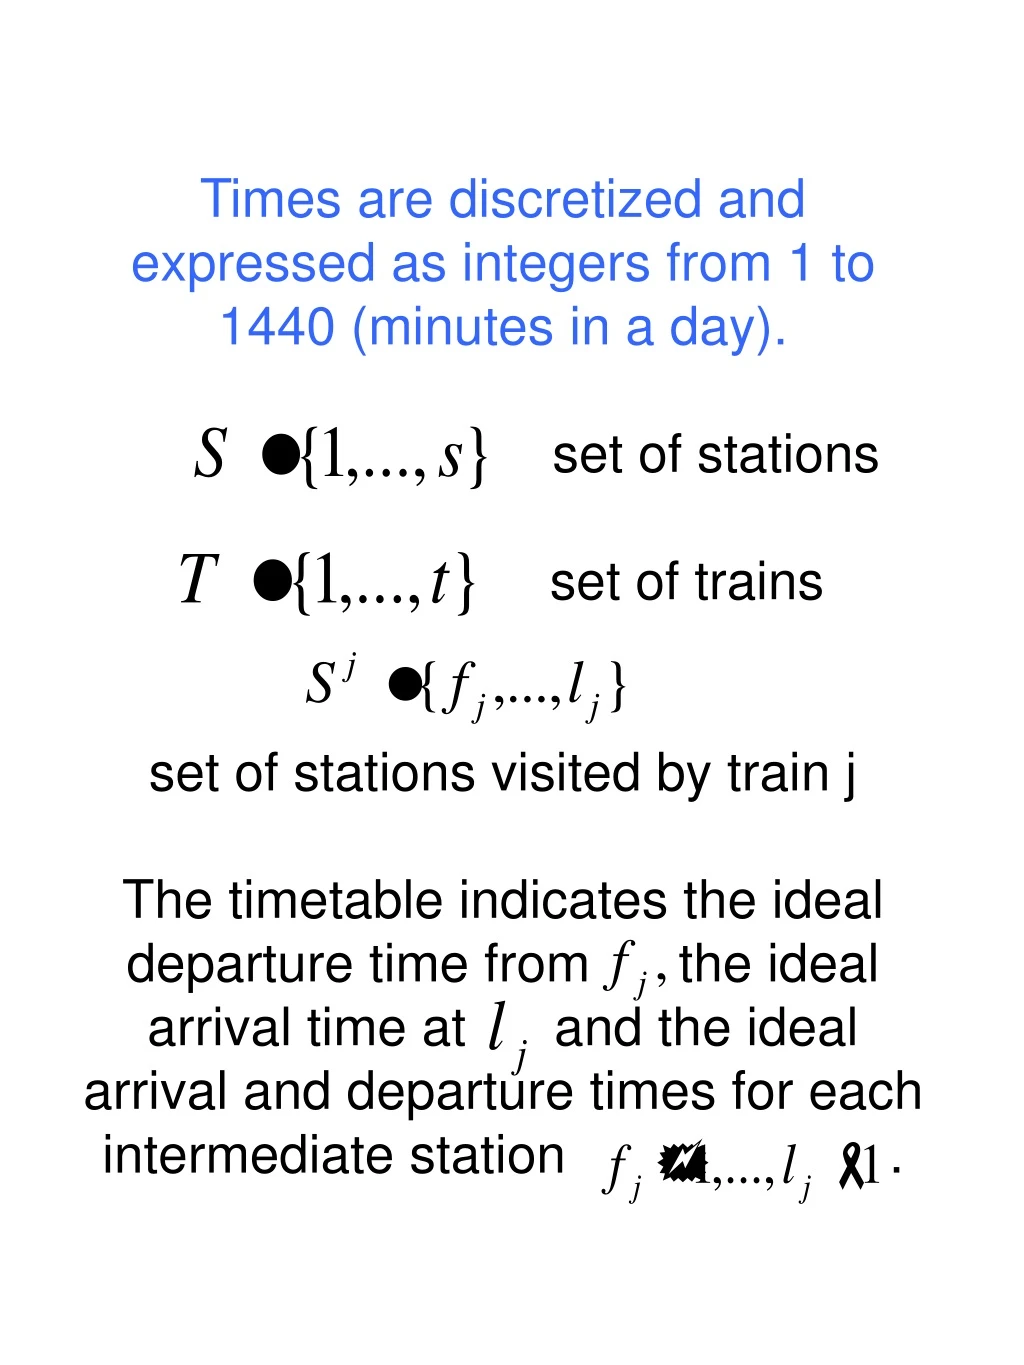 times are discretized and expressed as integers